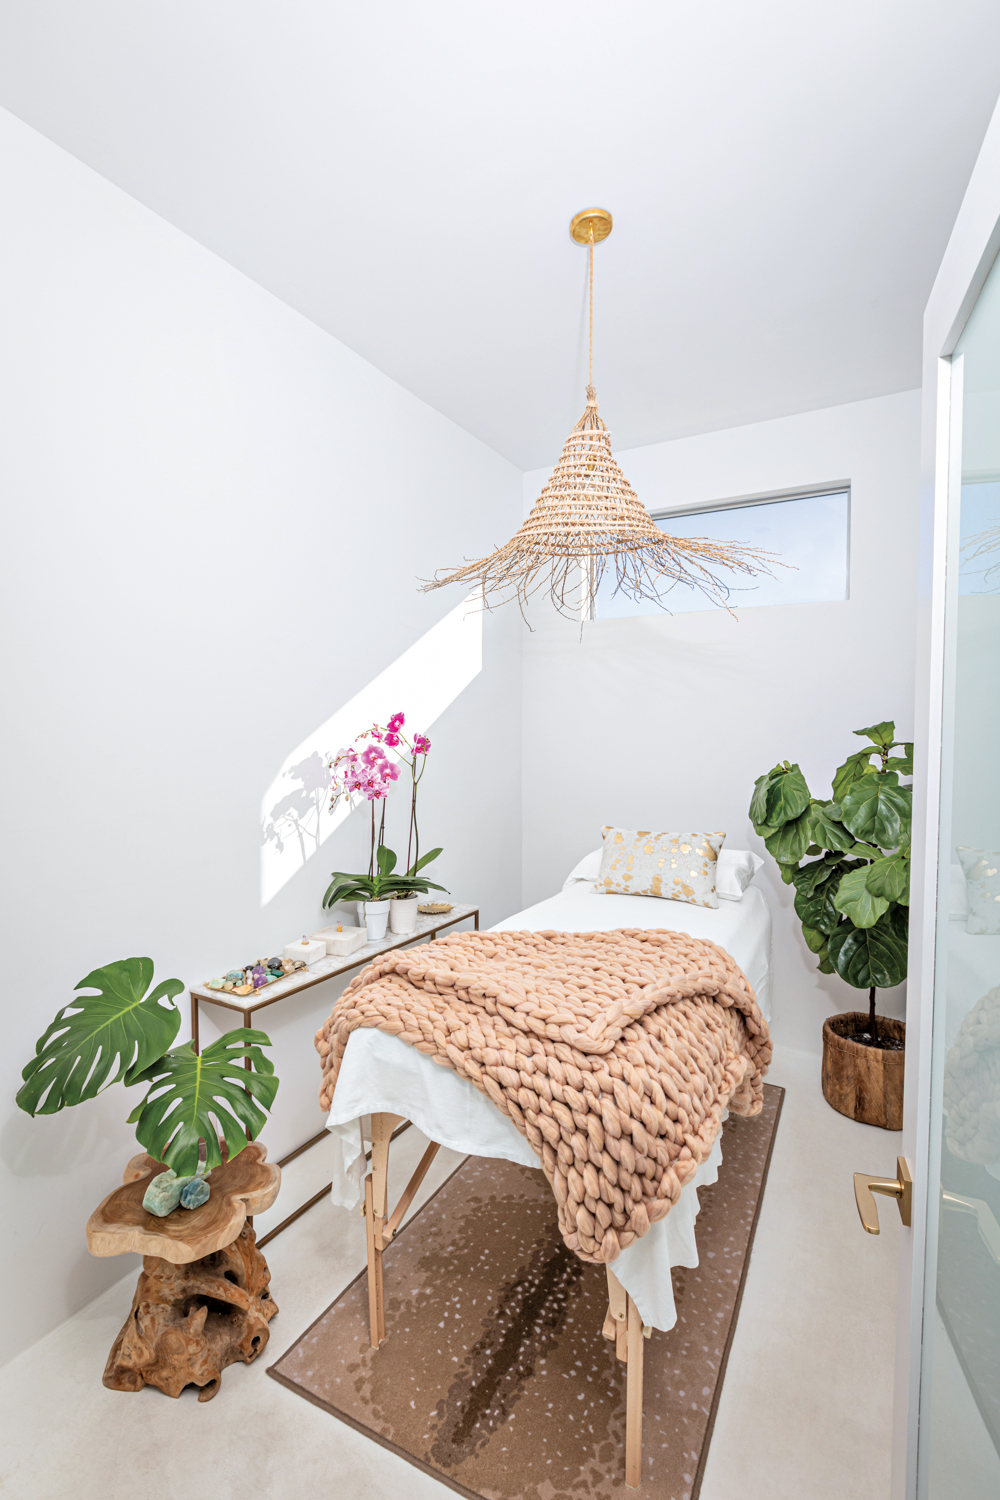 Treatment table with a cream throw blanket in a white room under a rattan-like pendant 